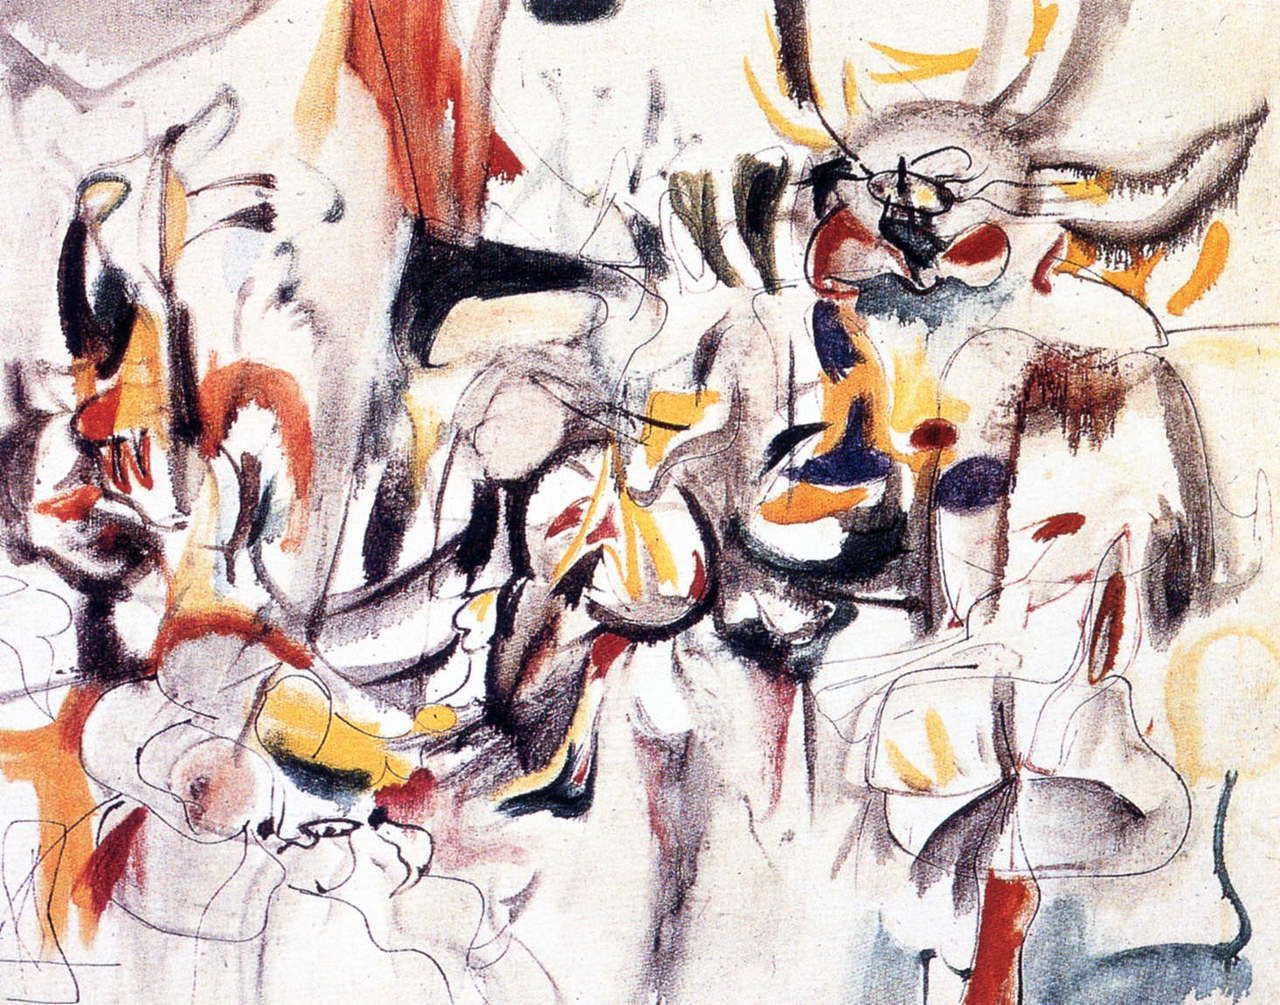 Arshile Gorky: To Project, To Conjure (1944). Expressionnisme abstrait, Abstrait, Peinture